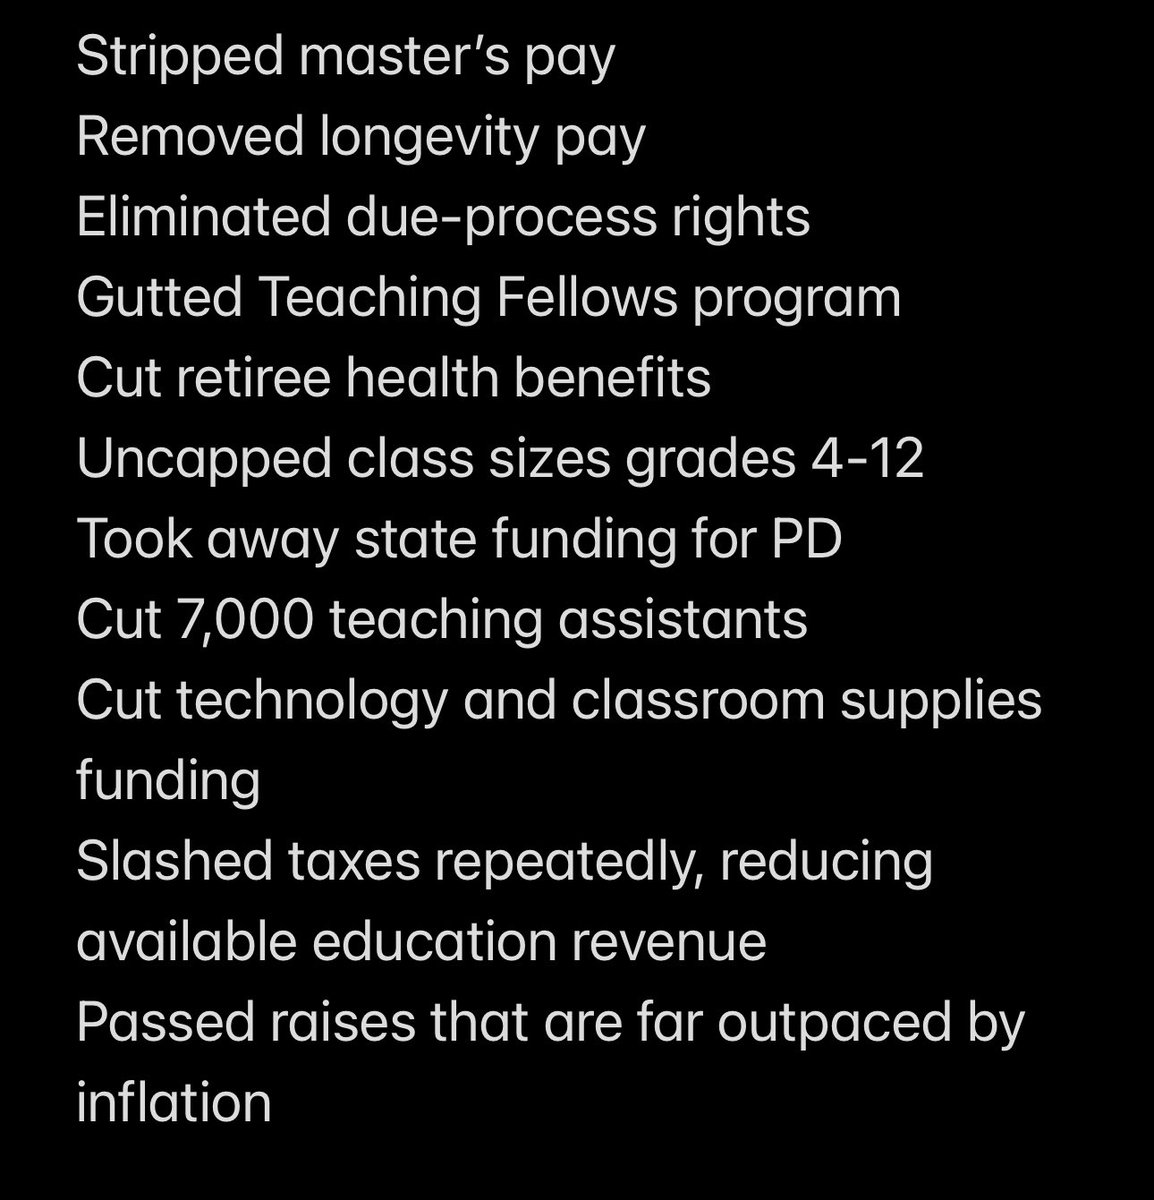 This is how the deliberate Republican dismantling of public education has occurred in NC since 2010. Deprive professionals of the resources they need to be content and successful. Pass laws to demean and undermine their work in the classroom. Death by a thousand cuts. #nced